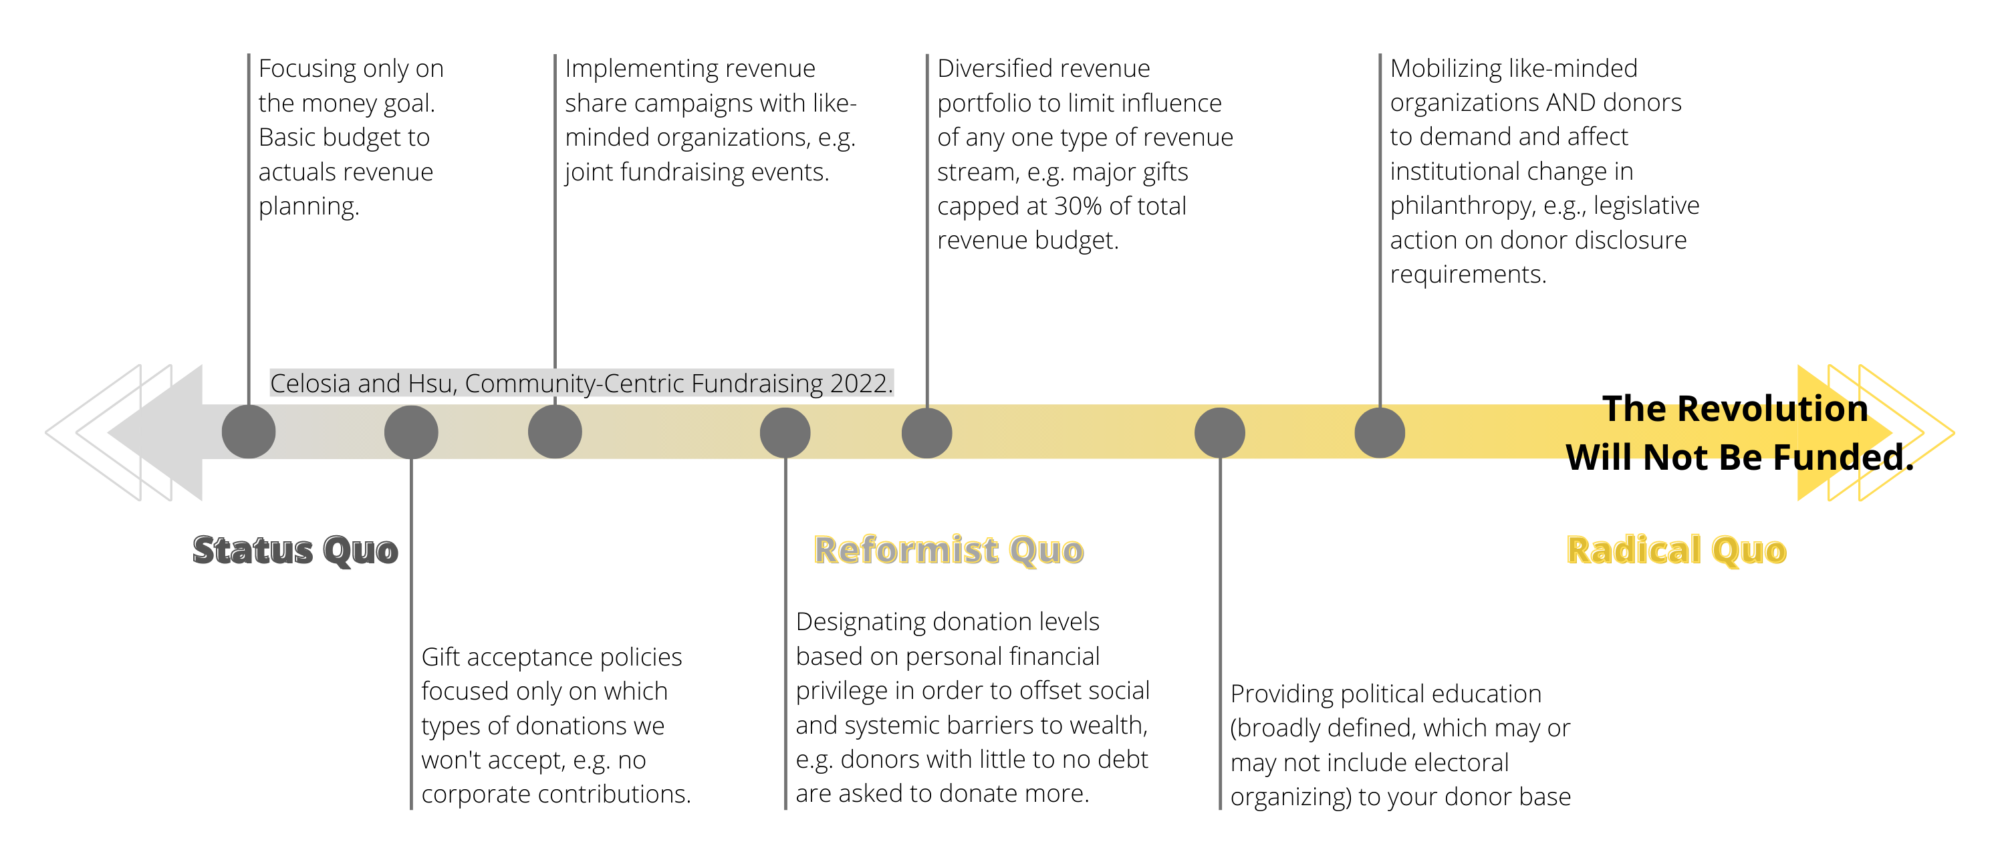 Image is a landscape orientation spectrum graph with three labels to demonstrate the range. The spectrum graph is designed as a line with arrows on both ends. The left side is grey and changes gradually to bright yellow.  Regarding the labels, on the left is “Status Quo, in the middle is “Reformist Quo,” and on the right is “Radical Quo” with the quote “The Revolution Will Not Be Funded.” Moving left to right from “Status Quo” to “Reformist Quo,” there are seven points on the spectrum that read: 1. “Focusing only on the money goal. Basic budget to actuals revenue planning,” 2. “Gift acceptance policies focused only on which types of donations we won’t accept, e.g. no corporate contributions,” 3. “Implementing revenue share campaigns with like-minded organizations, e.g. joint fundraising events.”   Moving towards “Reformist Quo” the points read: 4. “Designating donation levels based on personal financial privilege in order to offset social and systemic barriers to wealth, e.g. donors with little to no debt are asked to donate more,” 5. “Diversified revenue portfolio to limit influence of any one type of revenue stream, e.g. major gifts capped at 30% of total revenue.”   The points leading towards “Radical Quo” read: 6. “Providing political education (broadly defined, which may or may not include electoral organizing) to your donor base,” 7. “Mobilizing like-minded organizations AND donors to demand and affect institutional change in philanthropy, e.g., legislative action on donor disclosure requirements.”